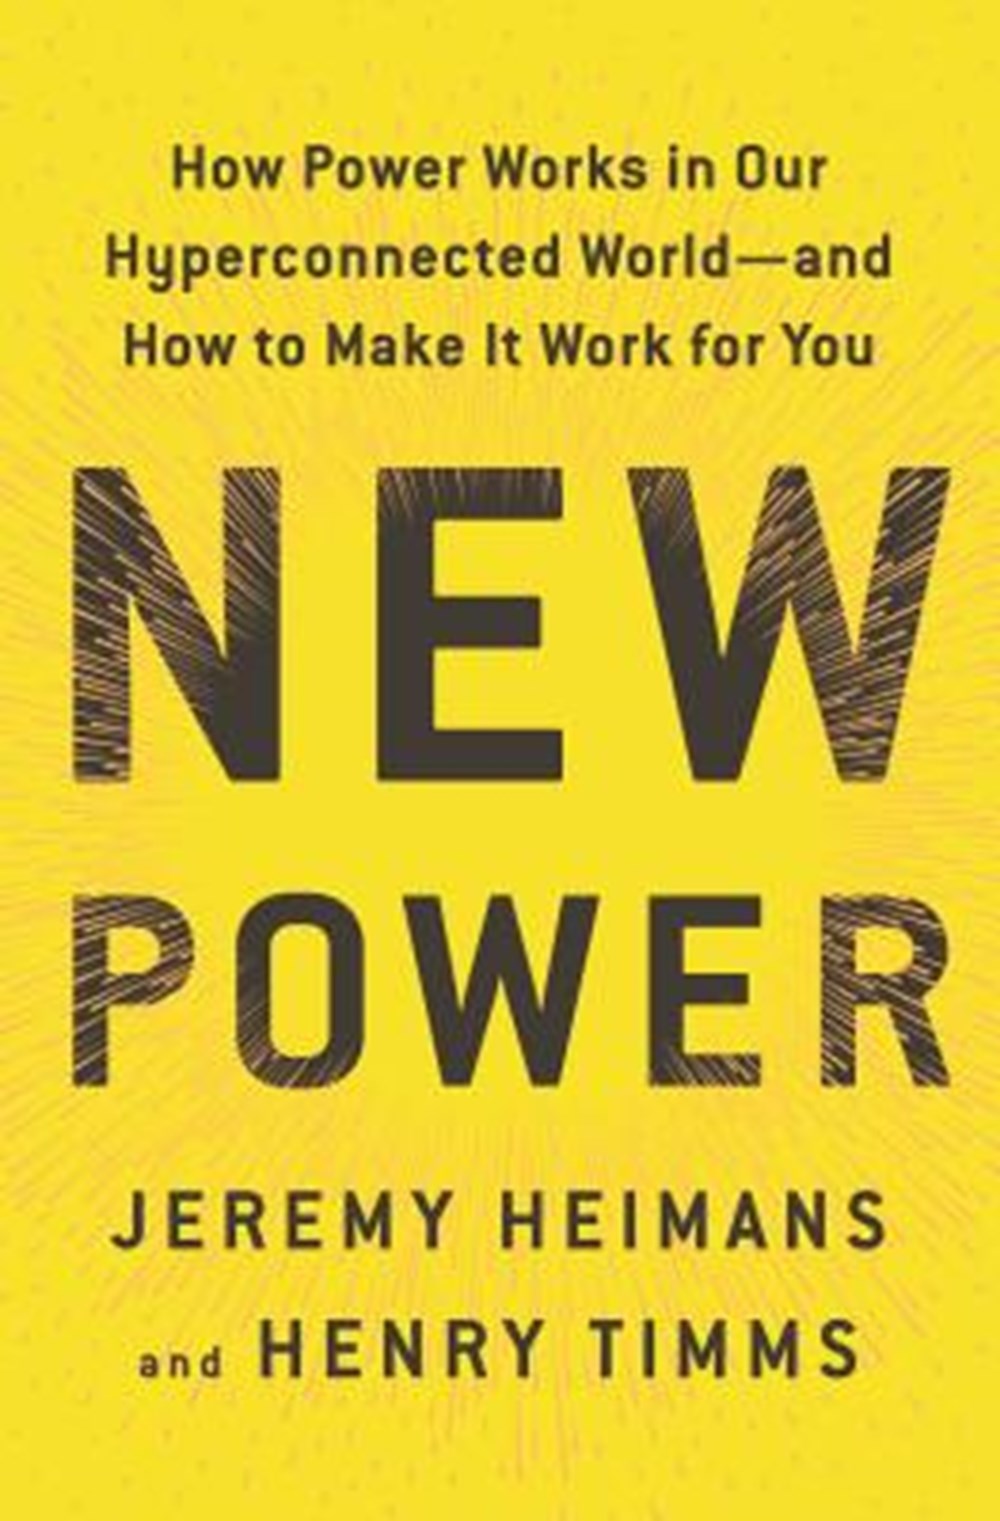 New Power How Power Works in Our Hyperconnected World--And How to Make It Work for You